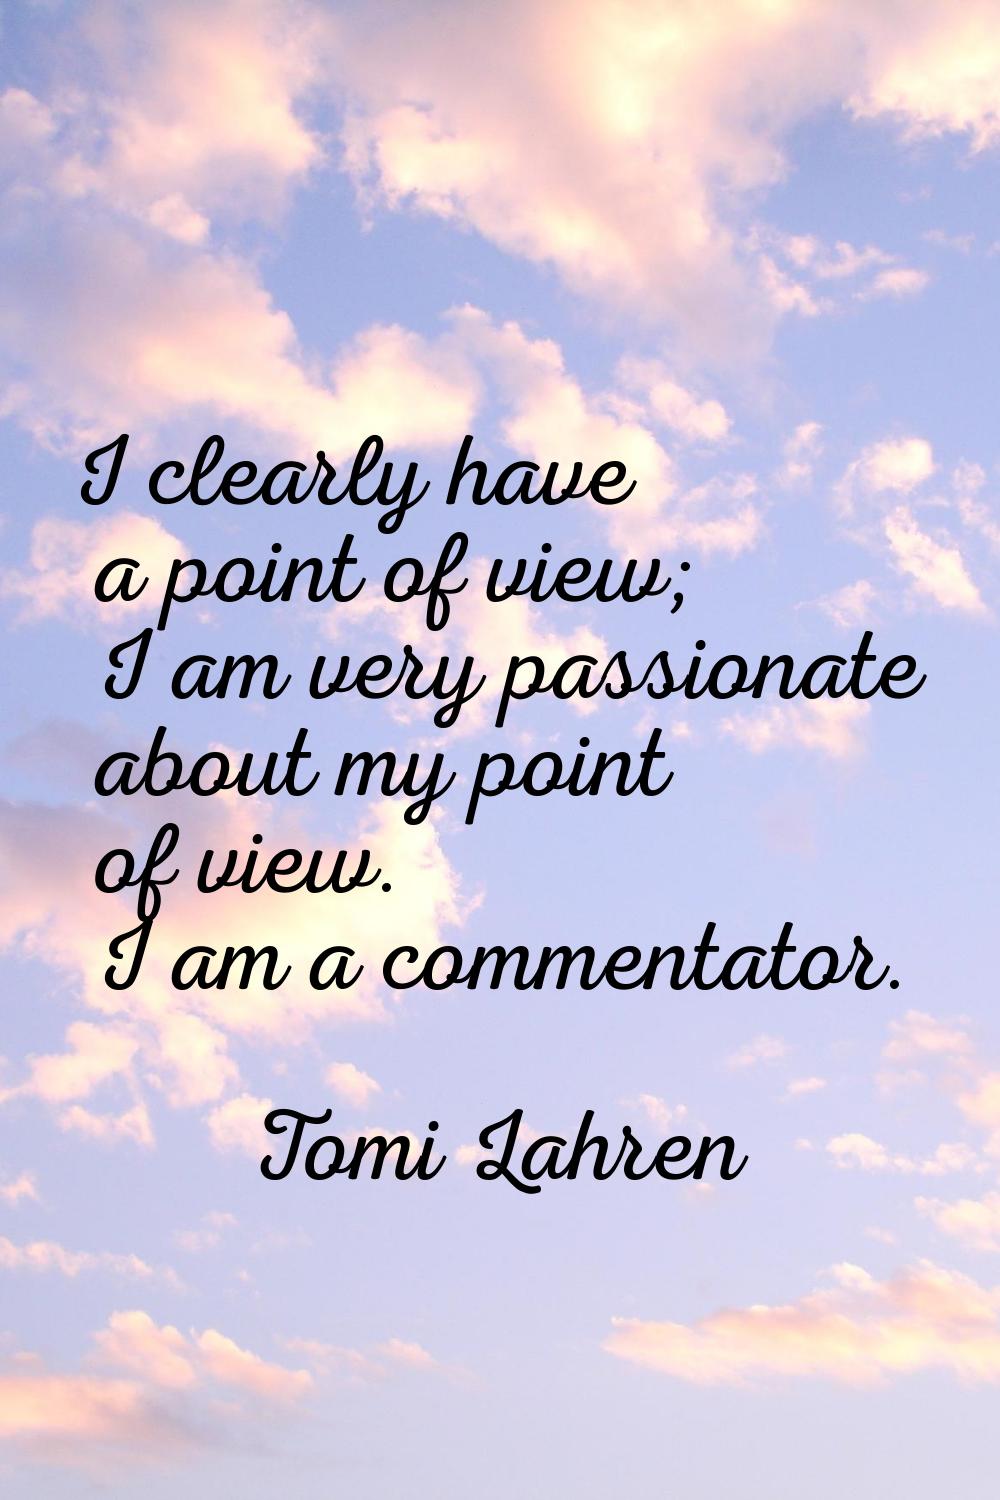 I clearly have a point of view; I am very passionate about my point of view. I am a commentator.